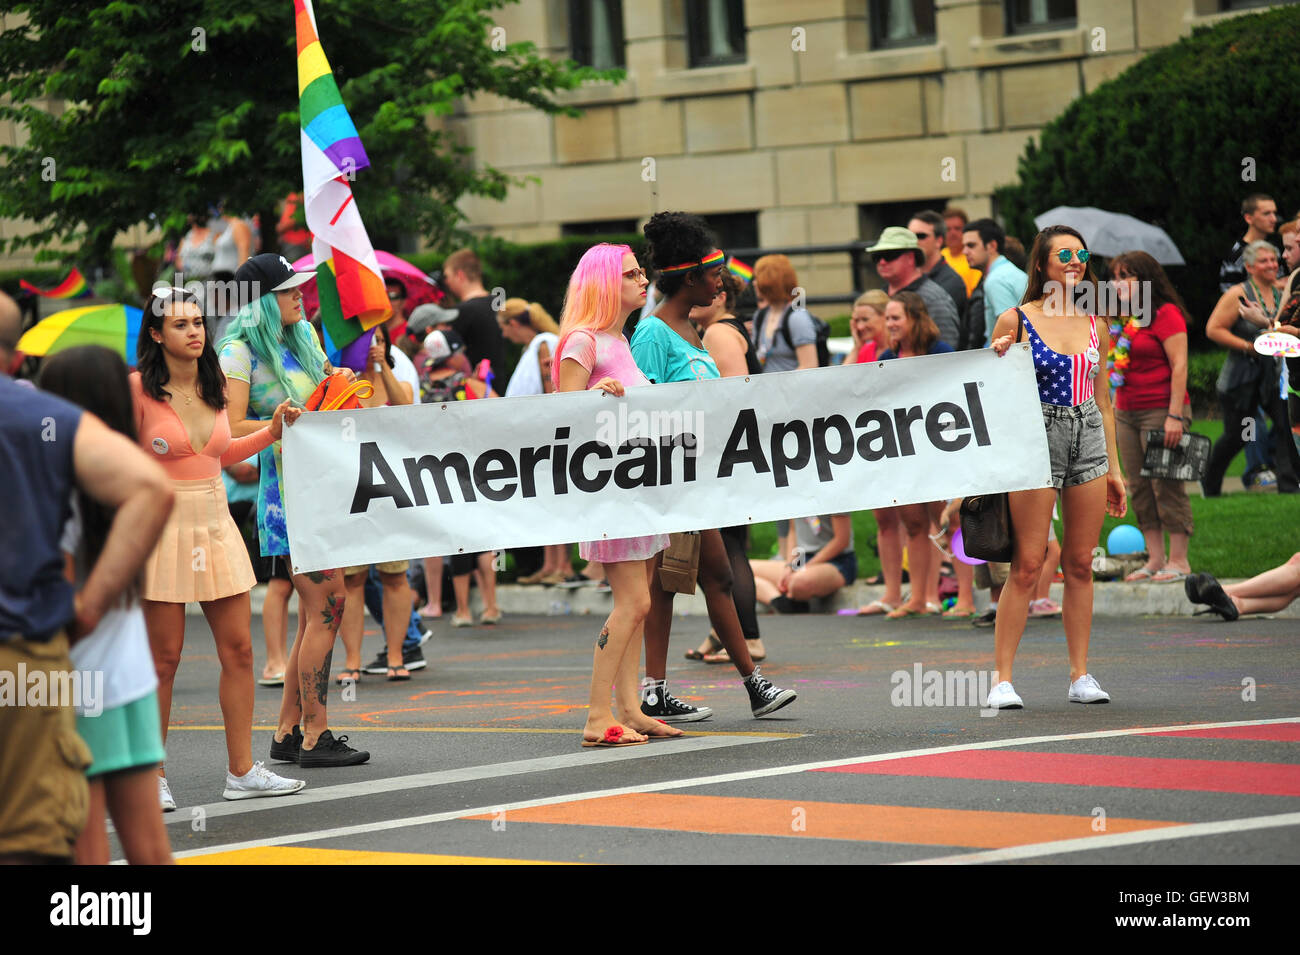 People holding an American Apparel banner during a Pride parade in the Canadian city of London, Ontario. Stock Photo